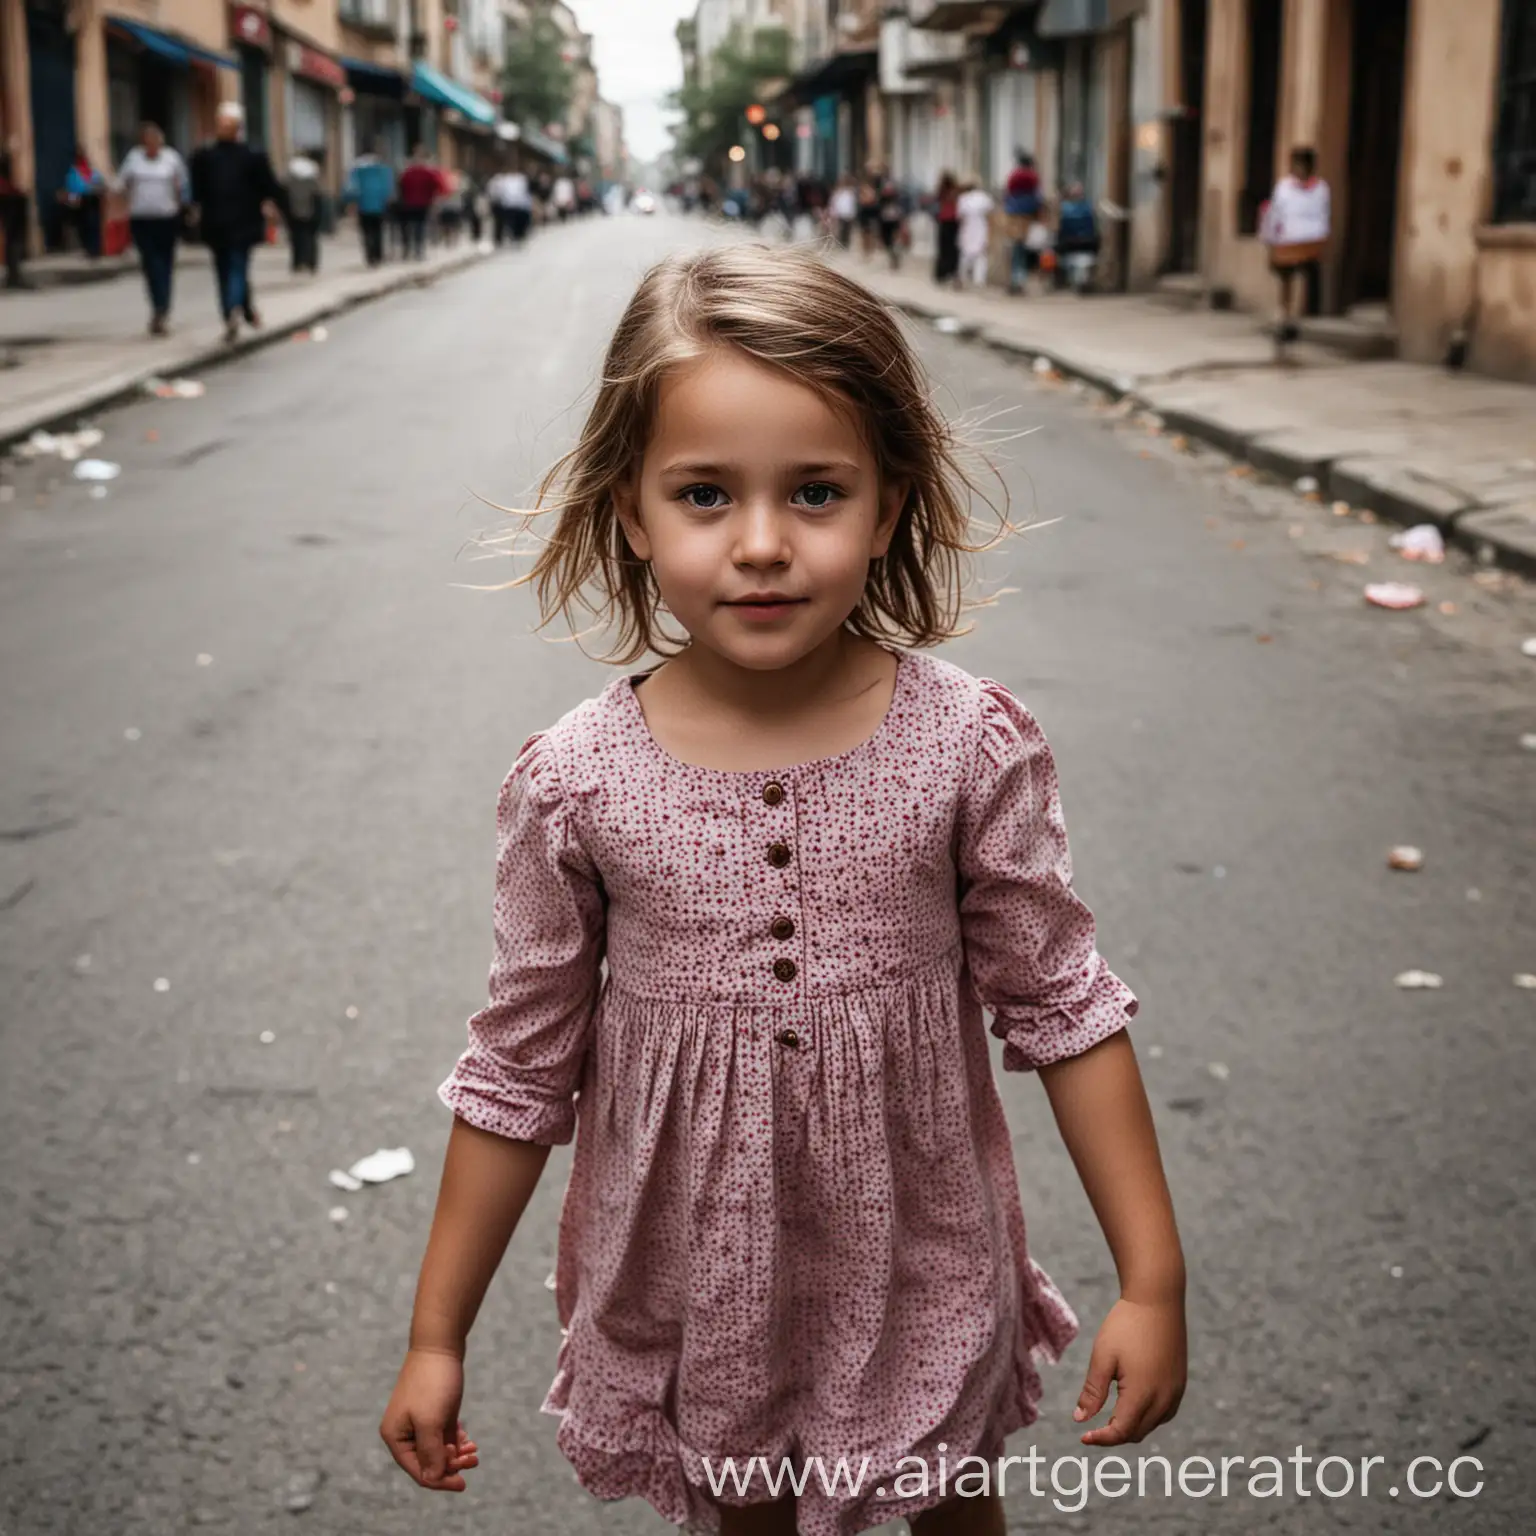 Young-Girl-Playing-on-Urban-Street